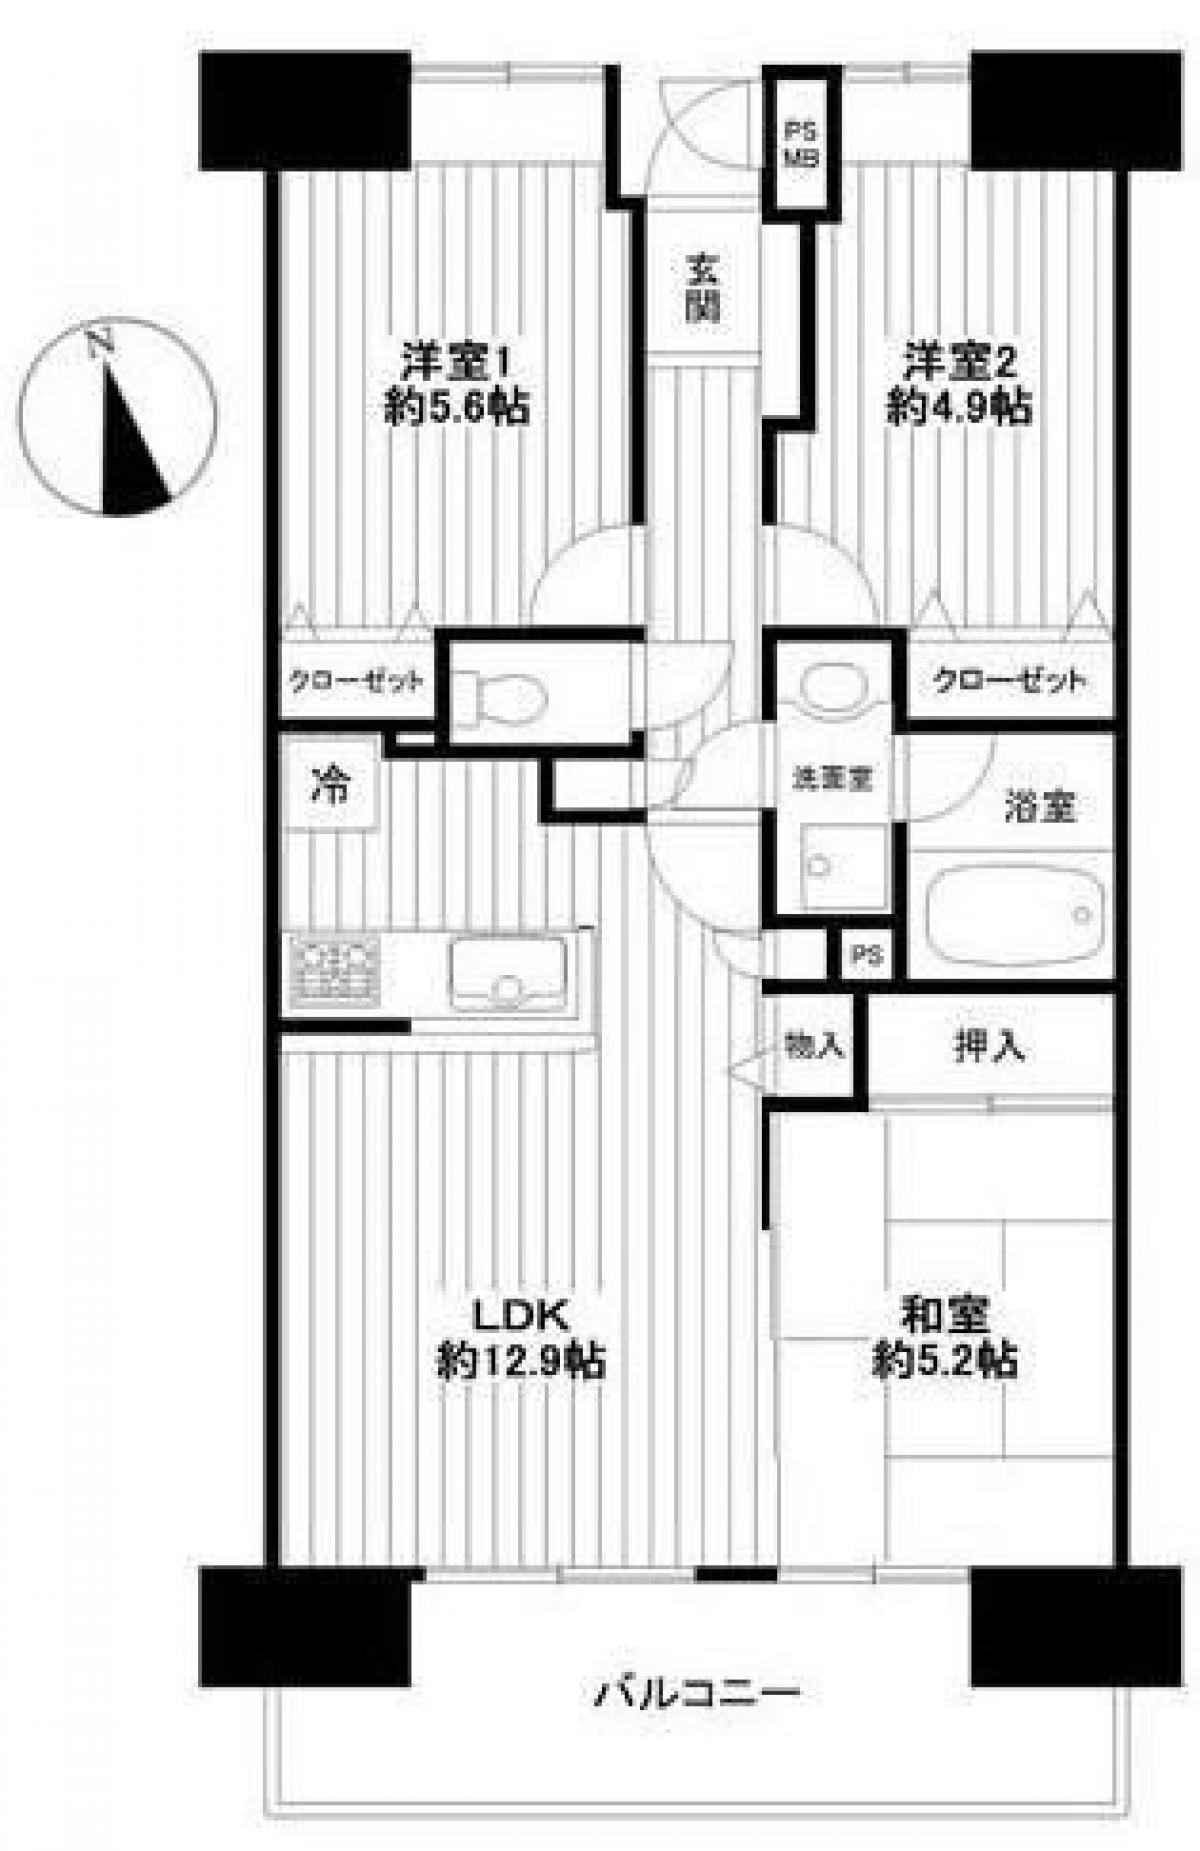 Picture of Apartment For Sale in Chiba Shi Mihama Ku, Chiba, Japan